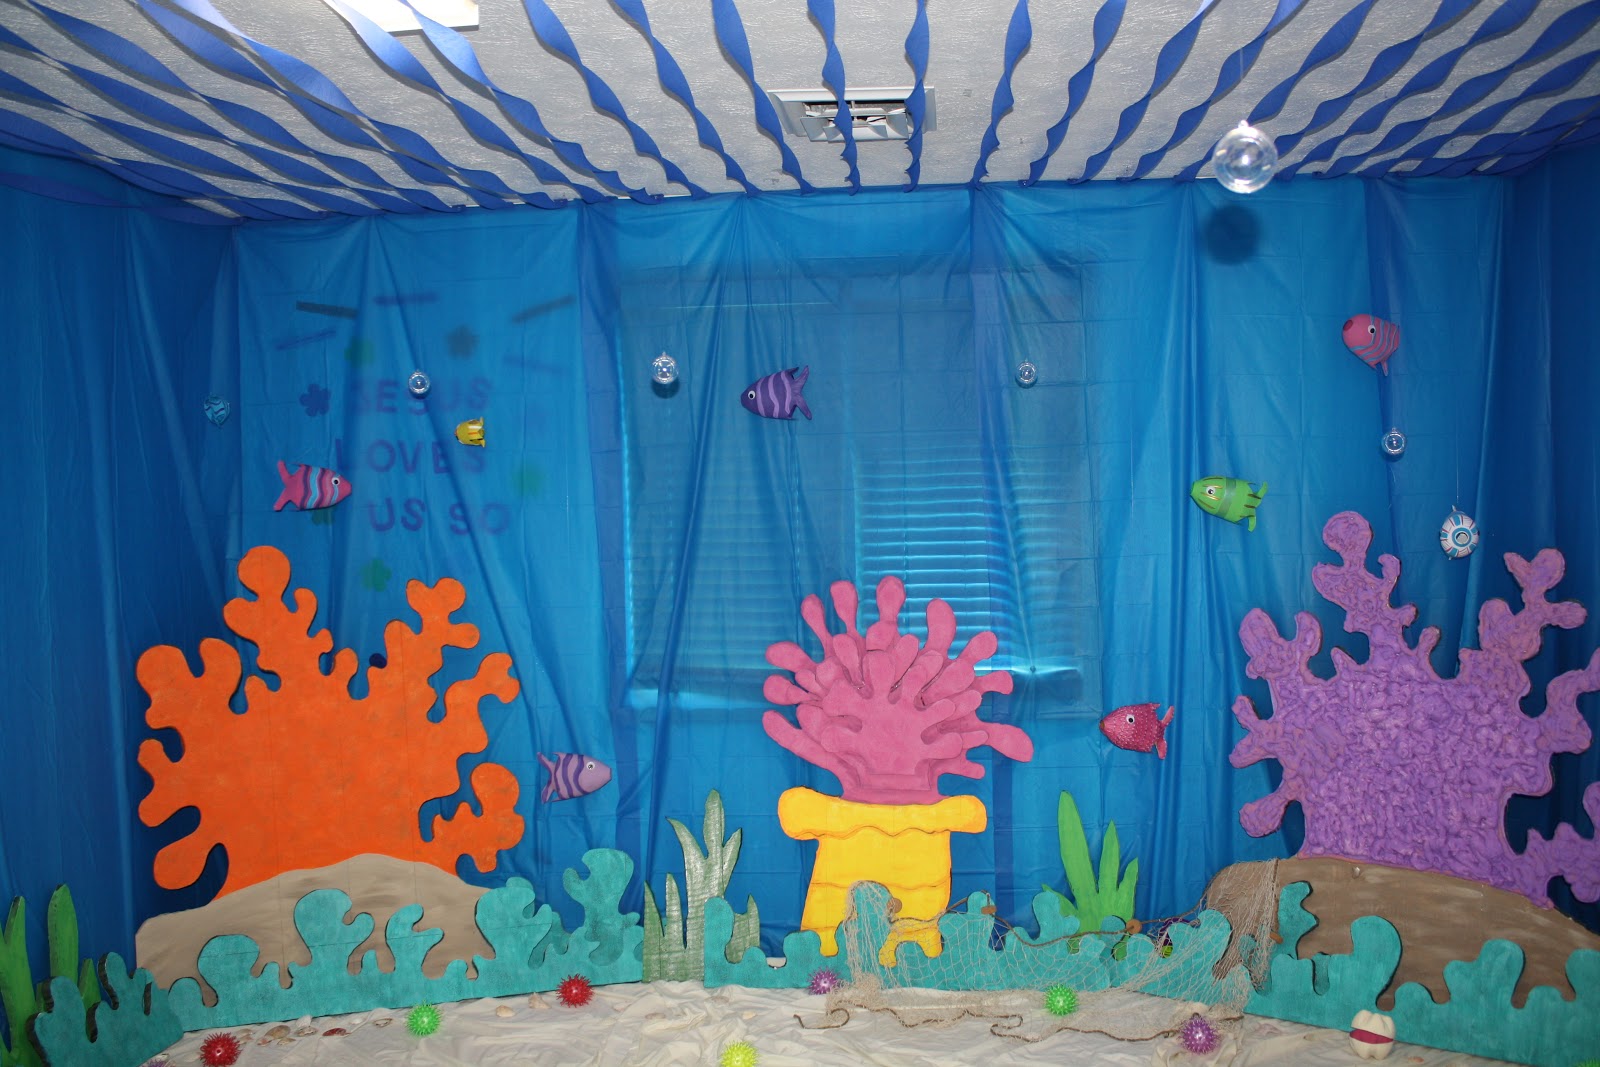 Eager Little Mind Under  the Sea  Decorations  for VBS